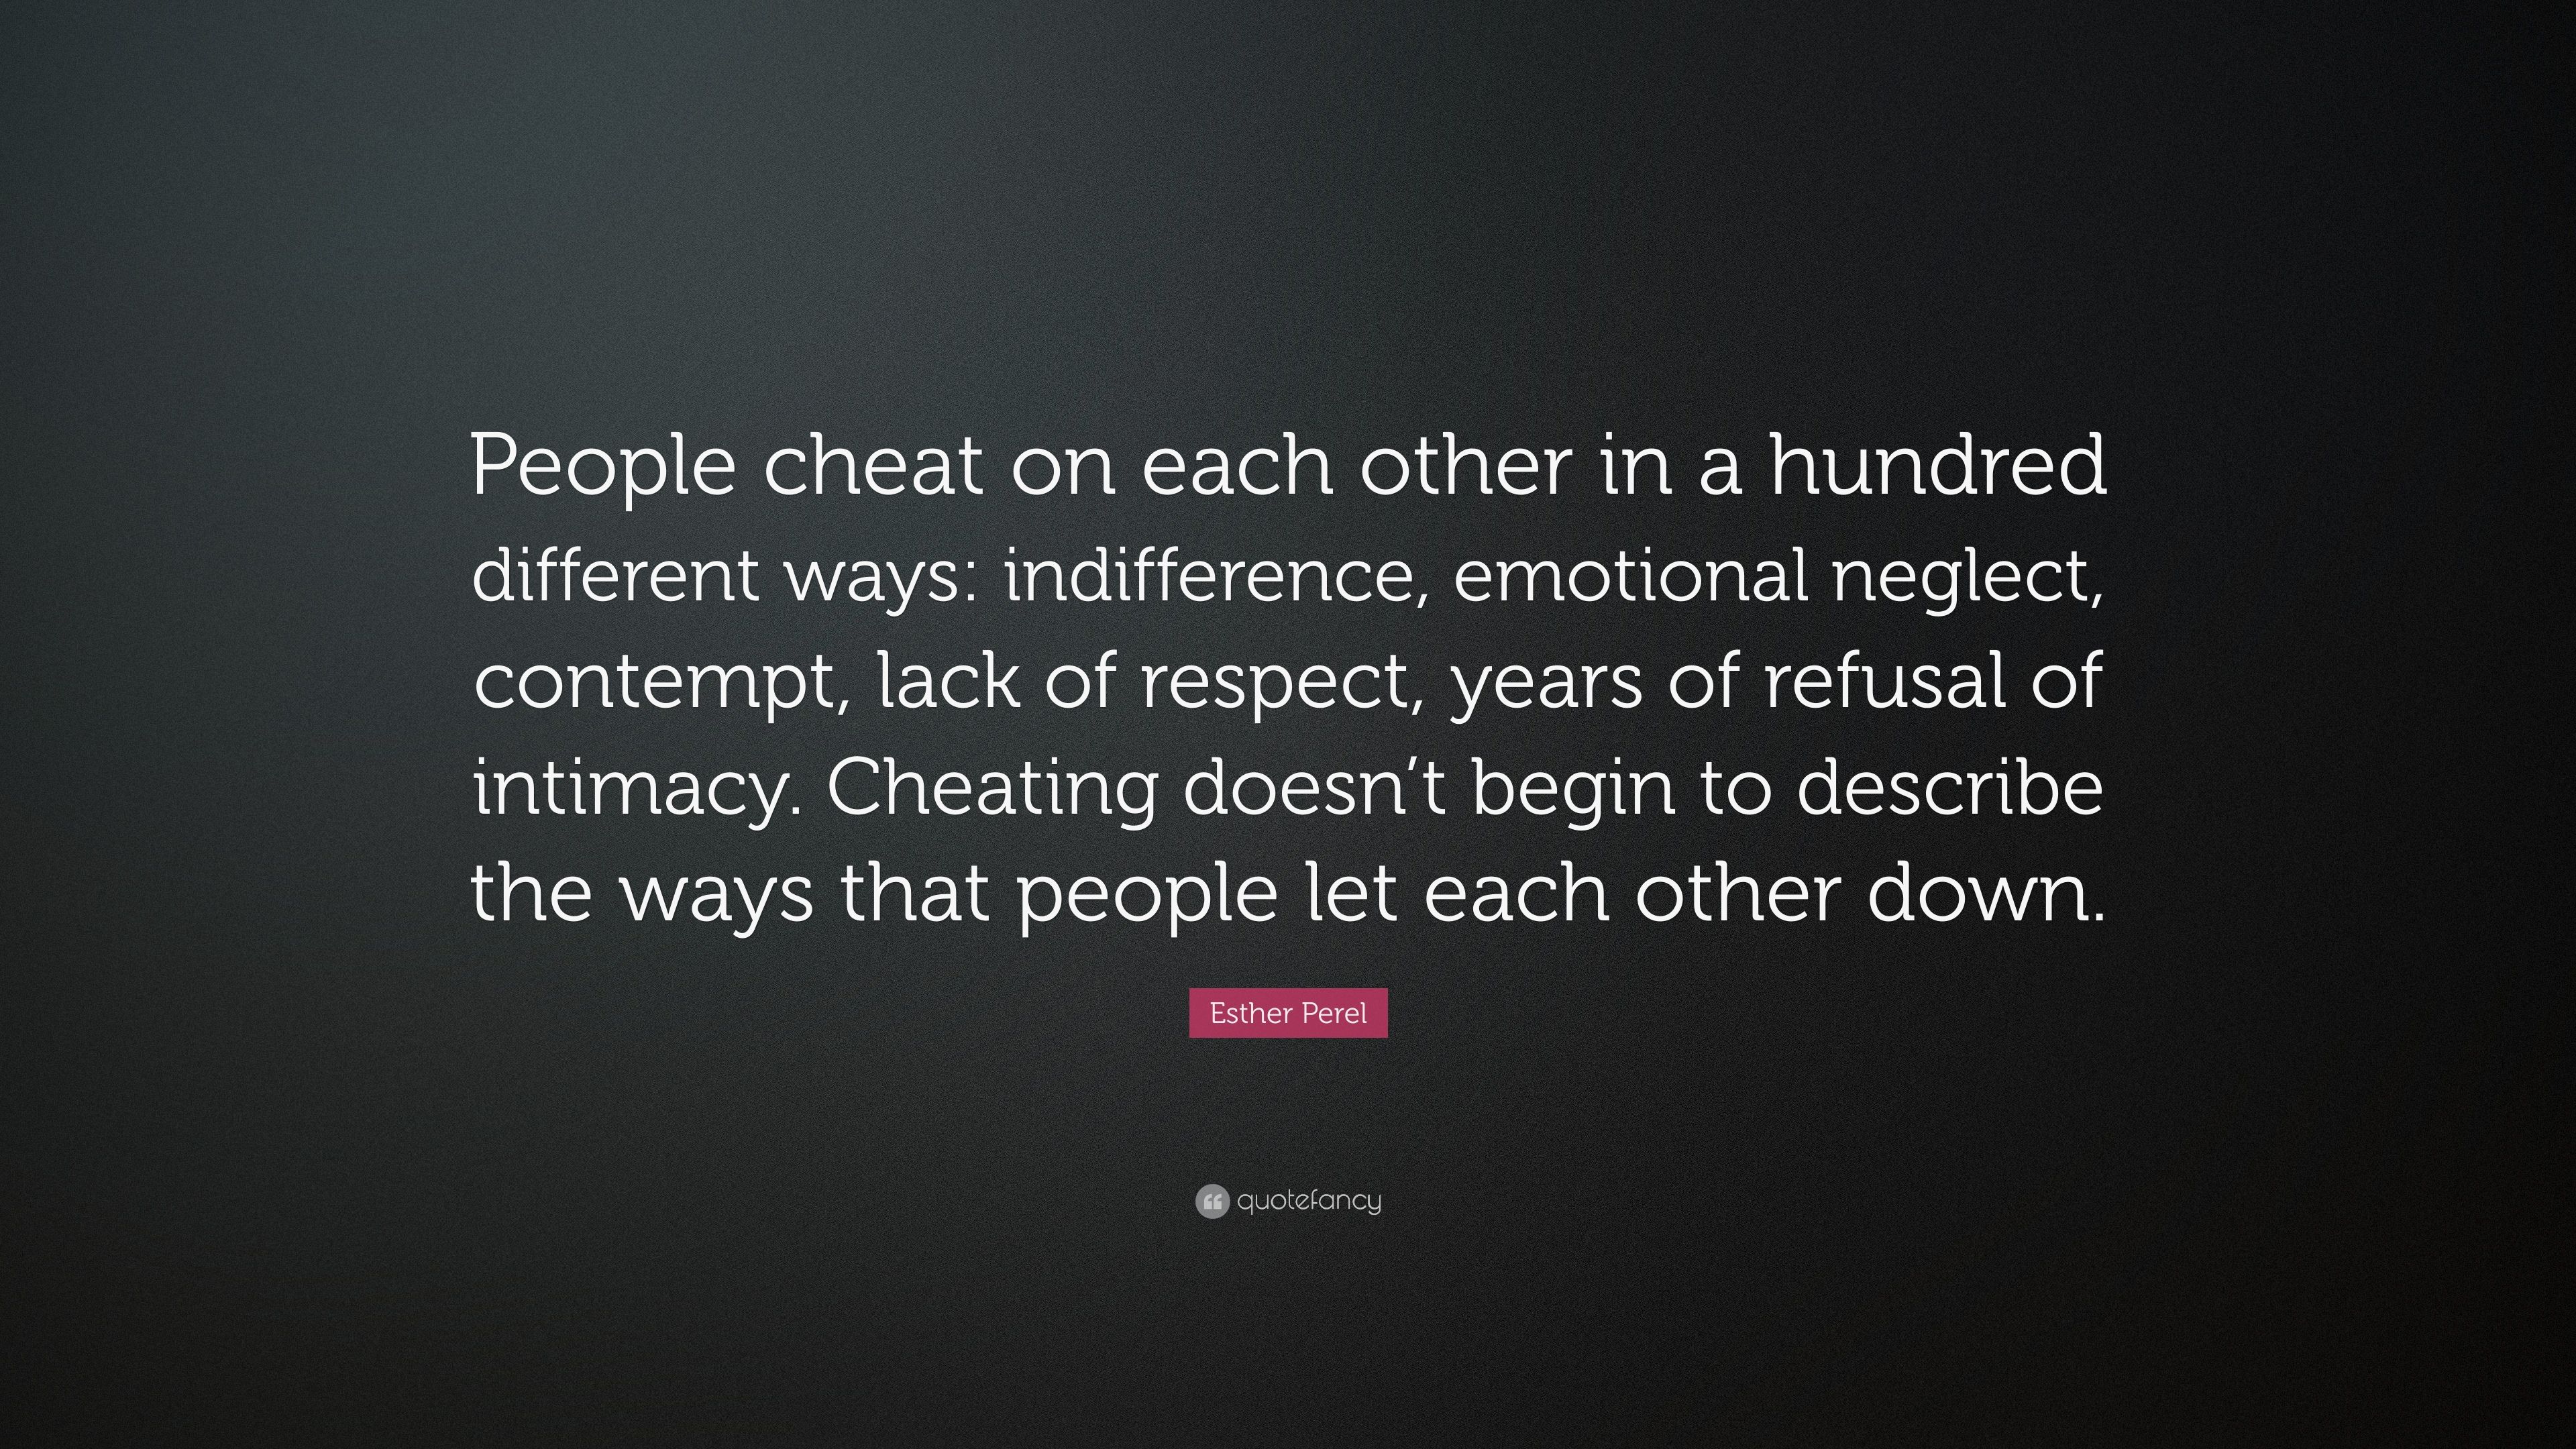 Esther Perel Quote: “People cheat on each other in a hundred different ways: indifference, emotional neglect, contempt, lack of respect, year.” (7 wallpaper)